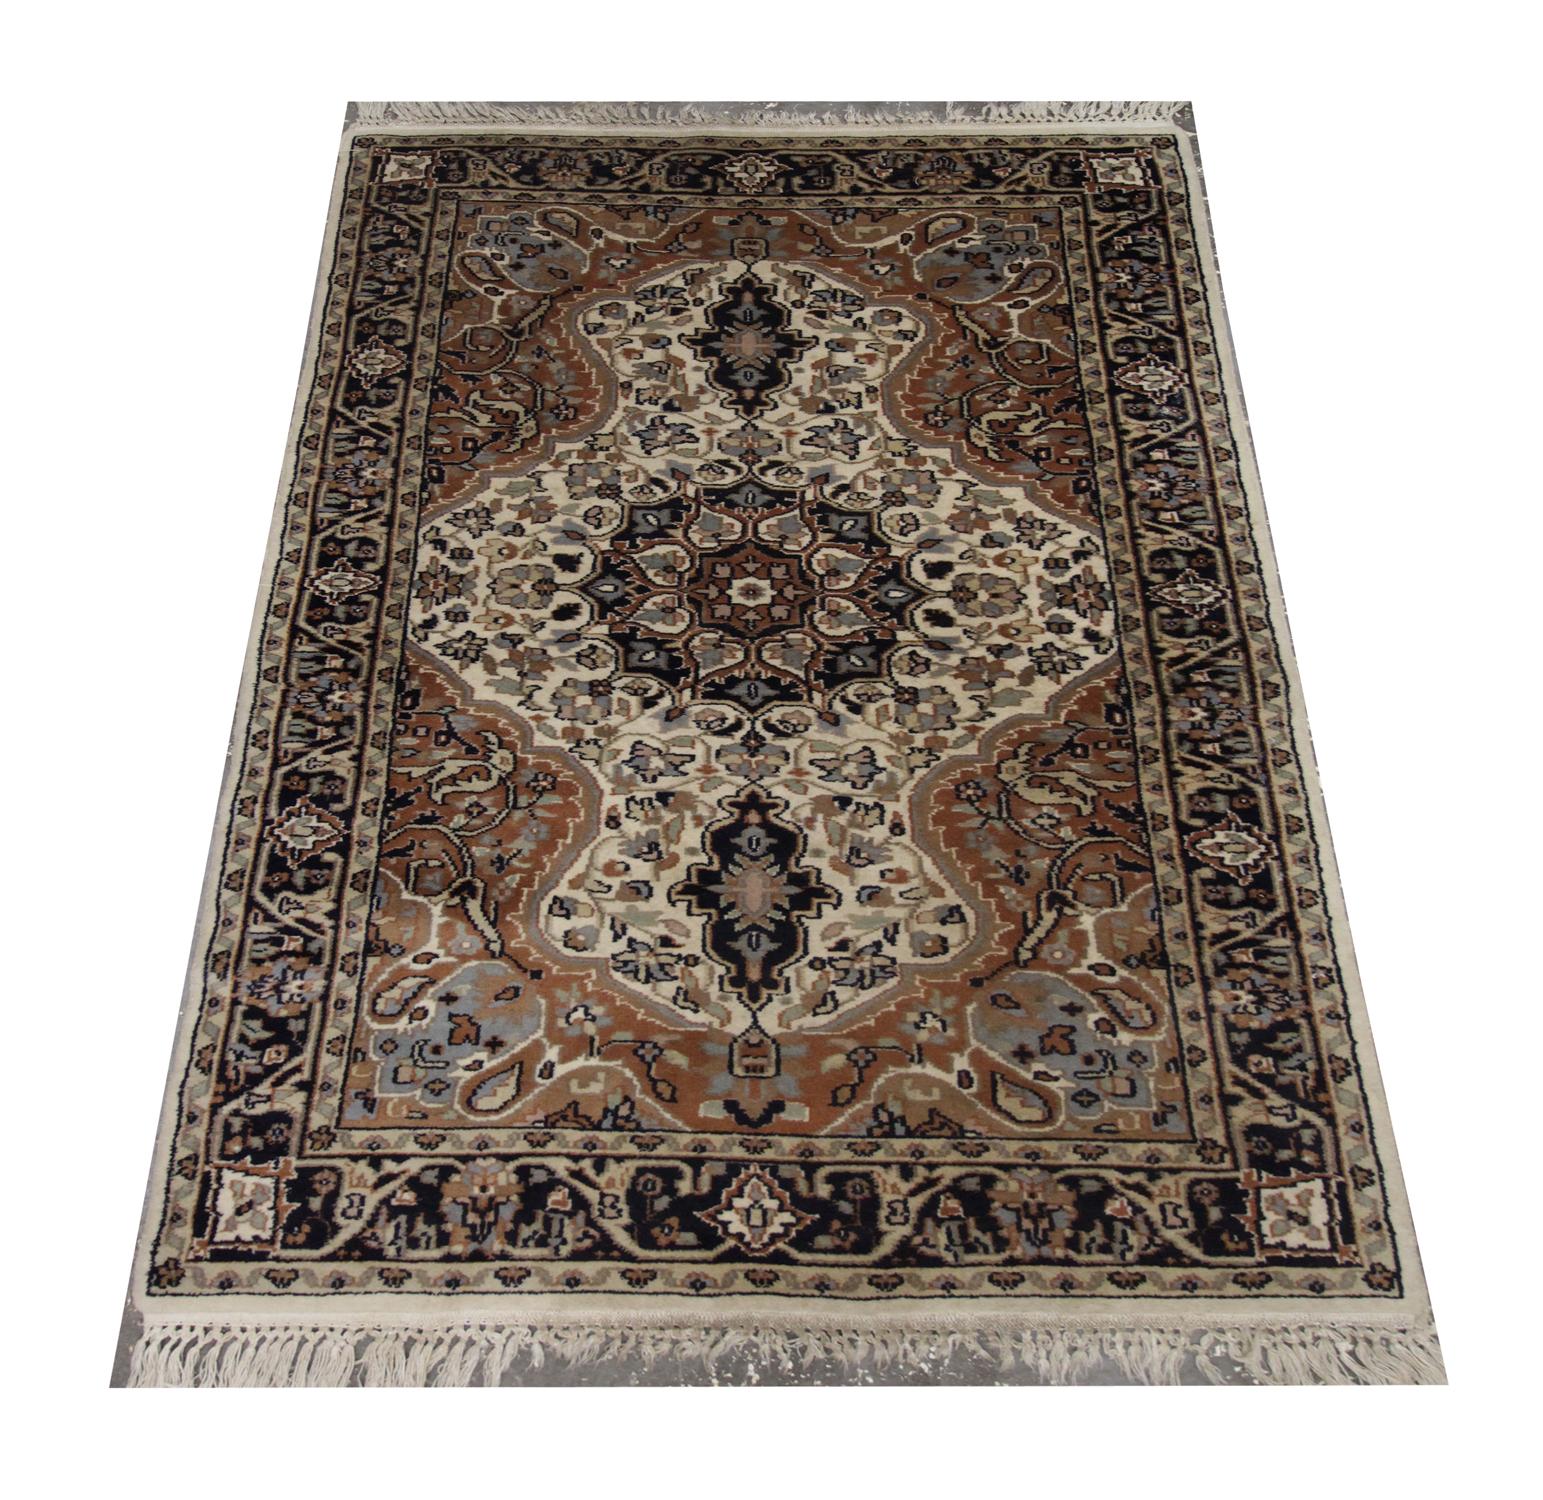 This Oriental rug vintage Indian rug was handwoven in 1890 with a highly-detailed central medallion design. Floral motifs meander from the centre in various colors of black, cream, grey and beige. This symmetrical design has been intricately woven.